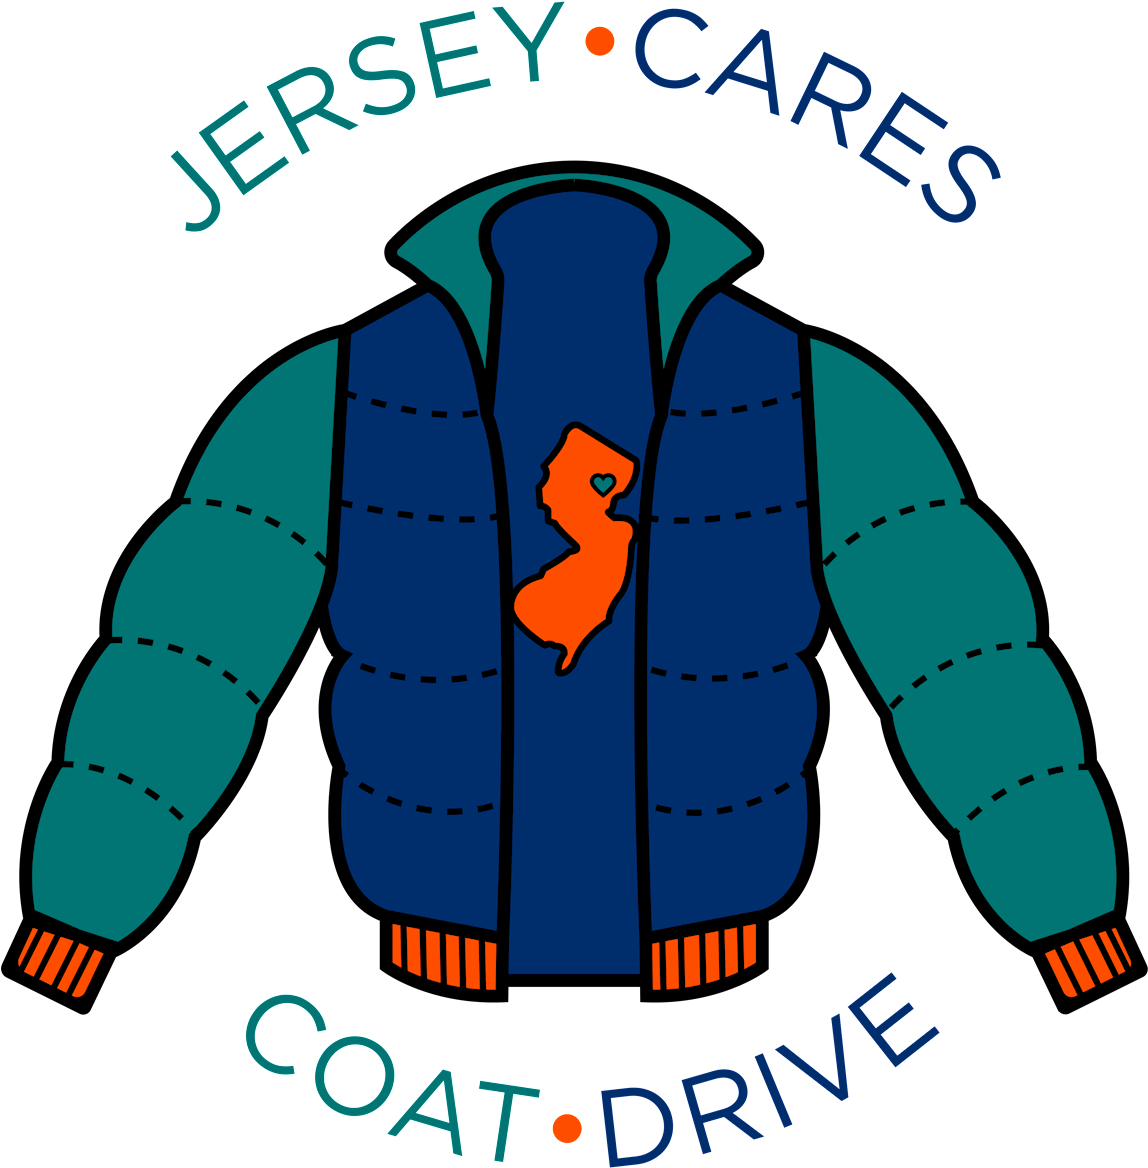 For The Past 22 Years, The Jersey Cares Coat Drive - Jersey Cares Coat Drive (1147x1200)